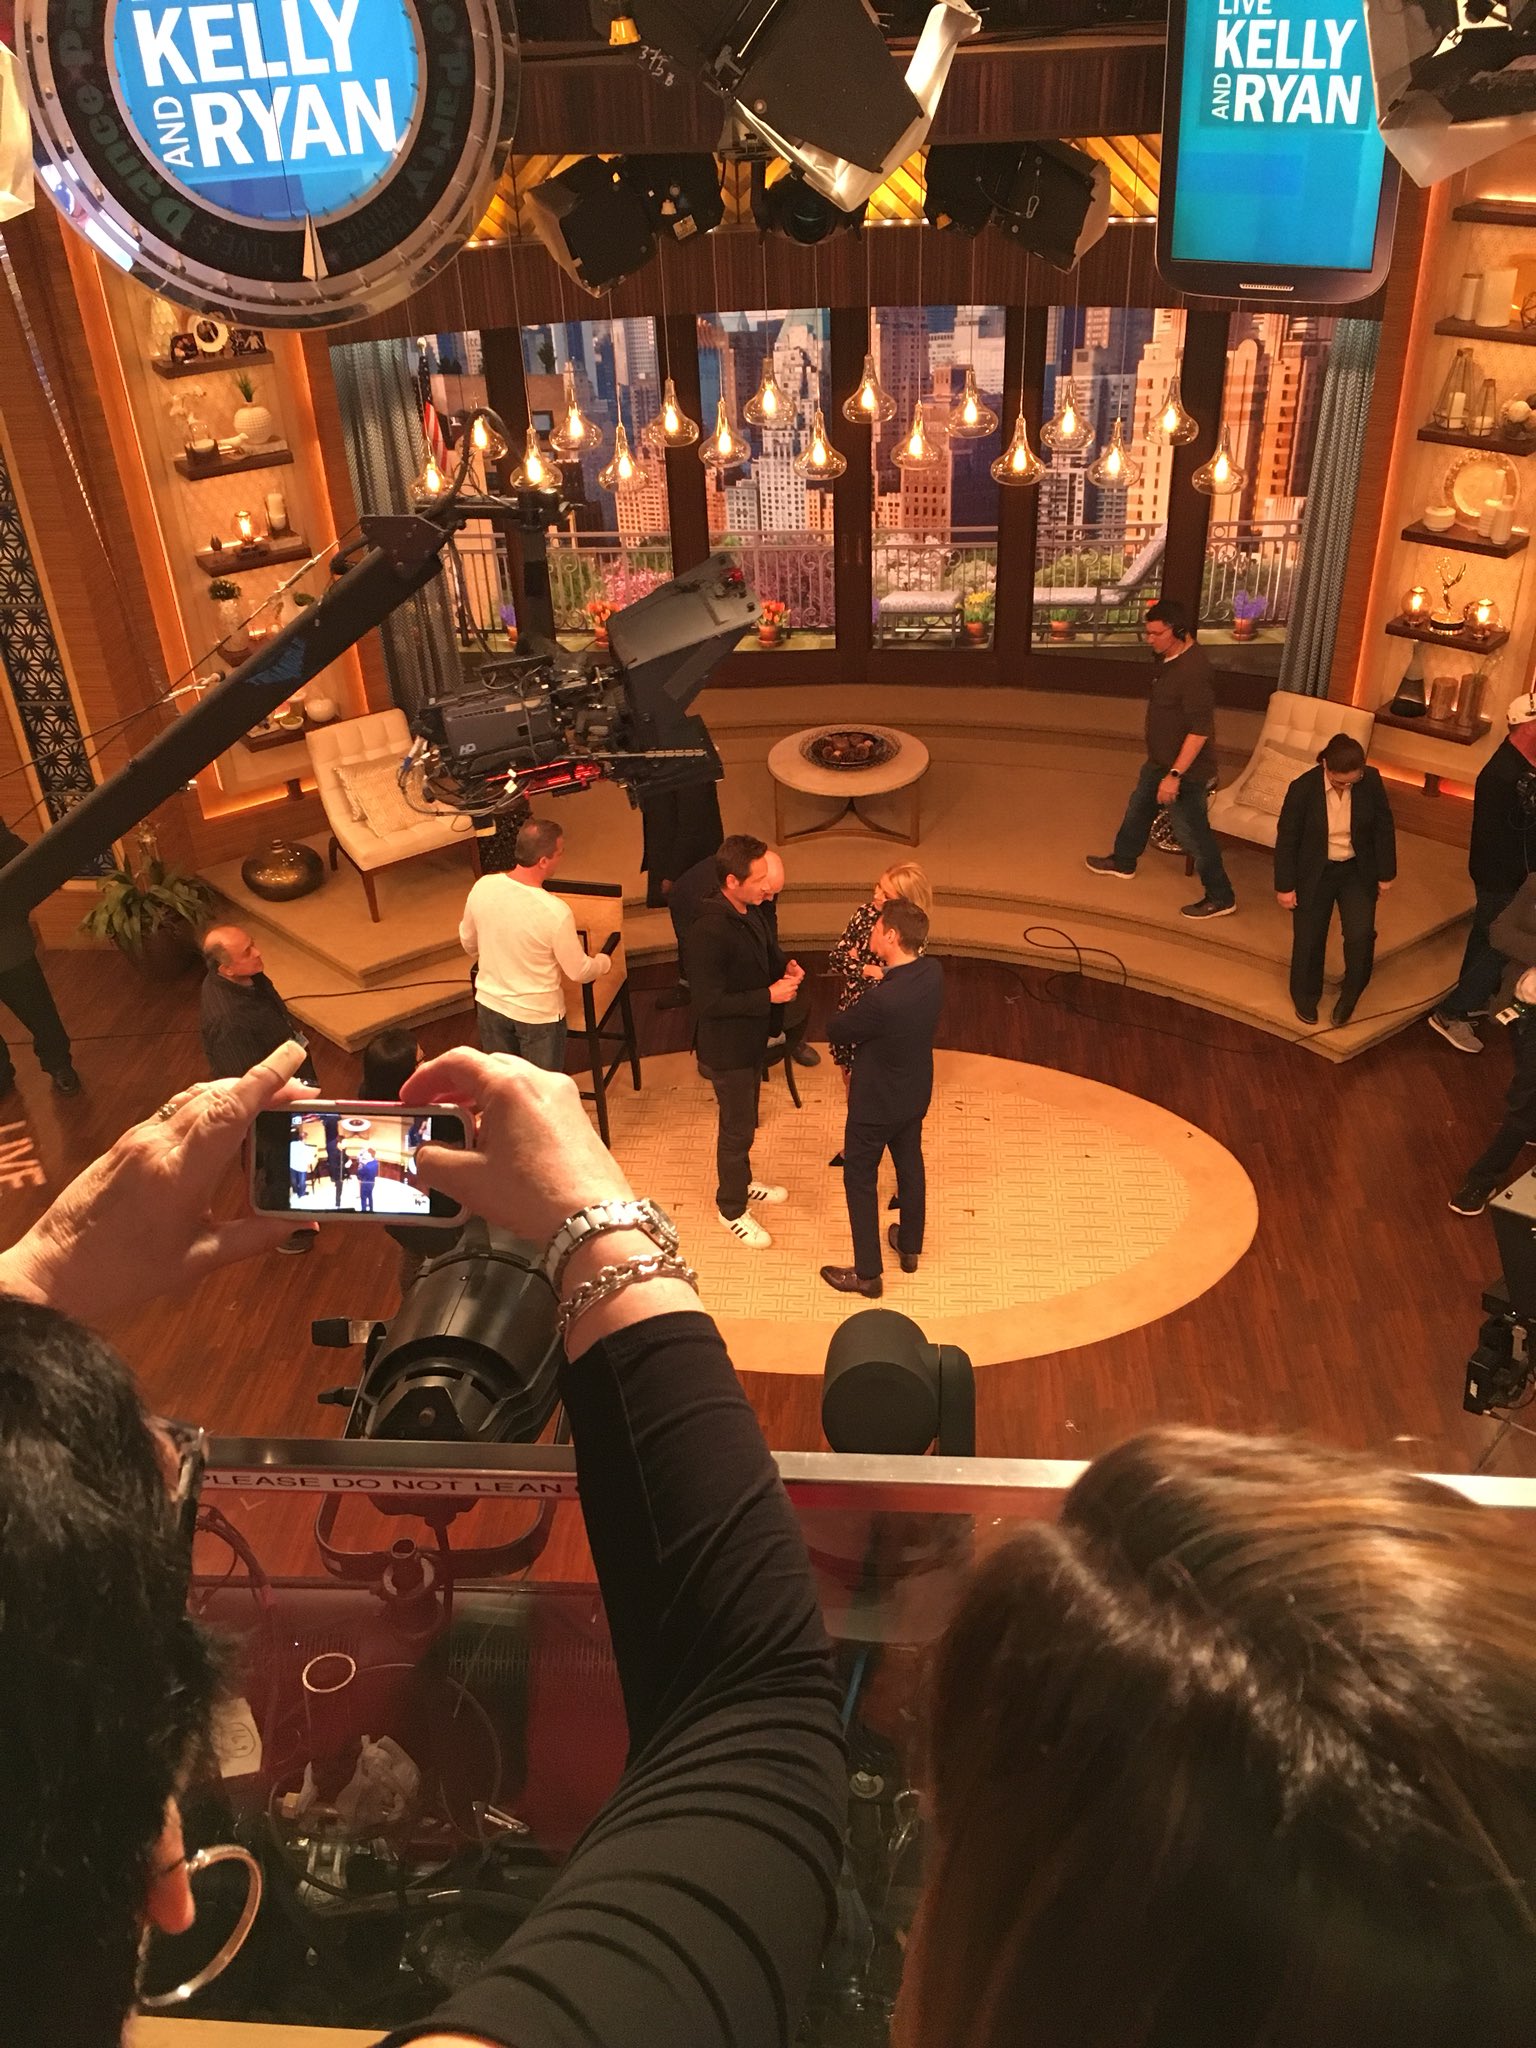 2018/04/30 - David on Live with Kelly and Ryan DcCQlIQX4AA1qyP